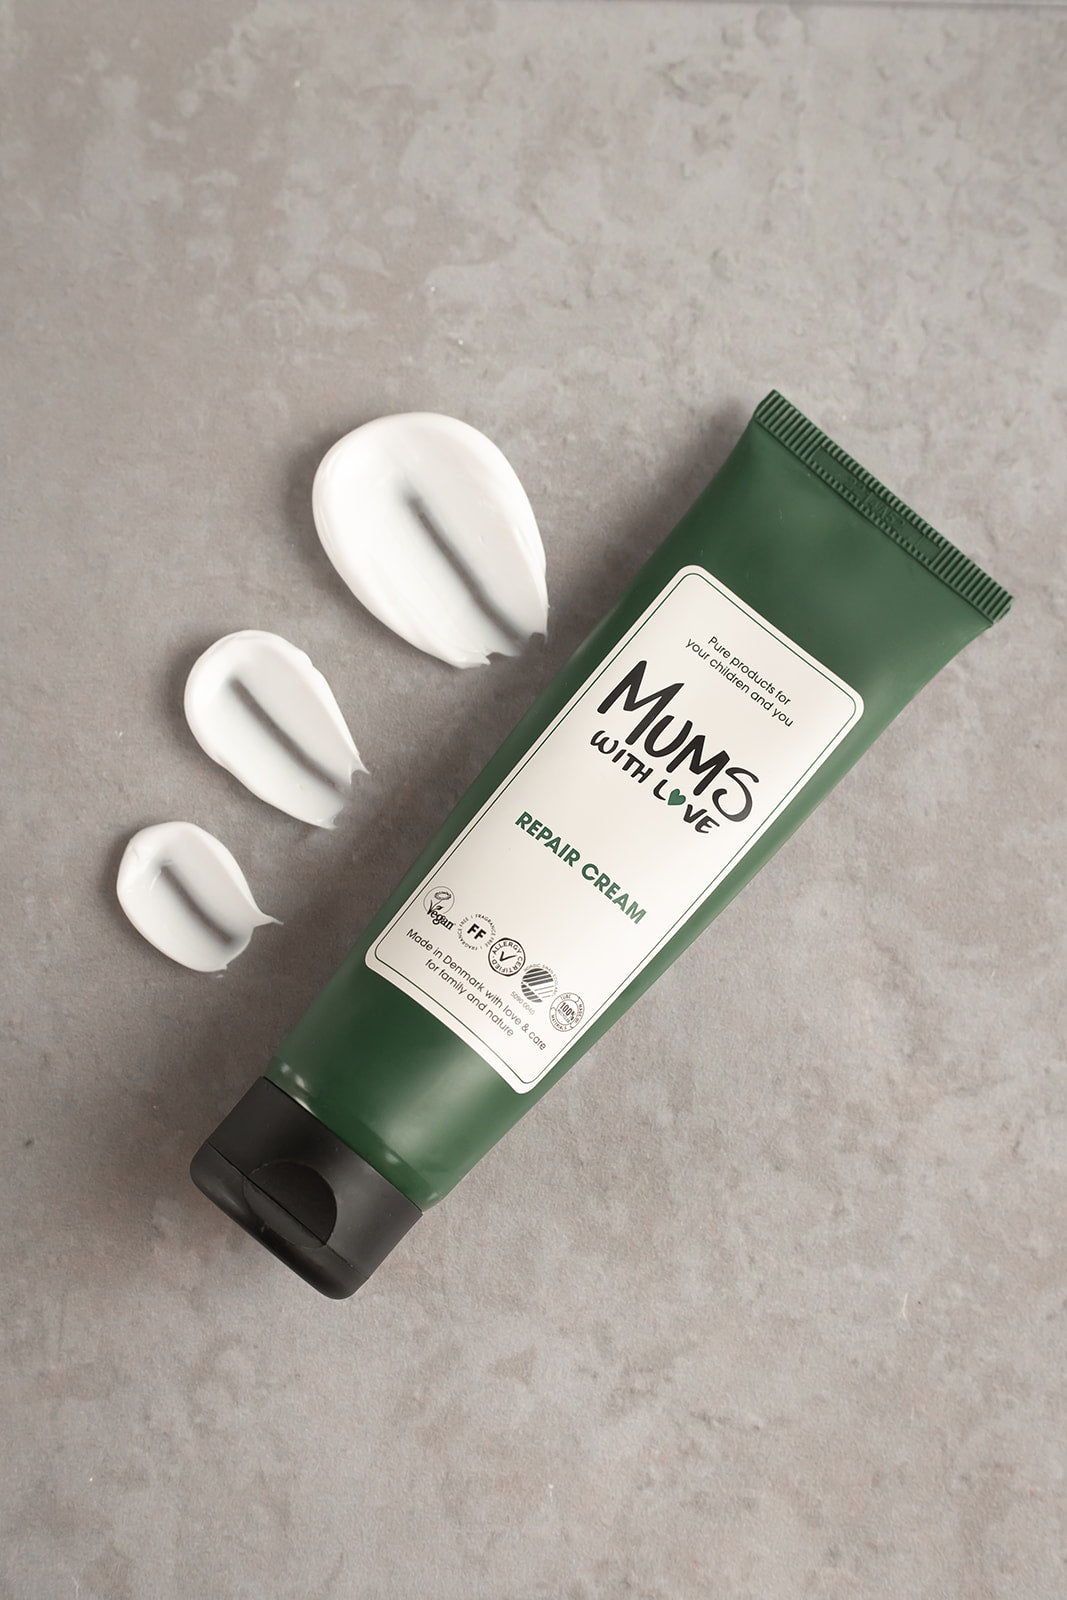 Certified, vegan and fragrance free Repair Cream from MUMS WITH LOVE. Samples of the cream is smeared out on the side of the sustainable tube.